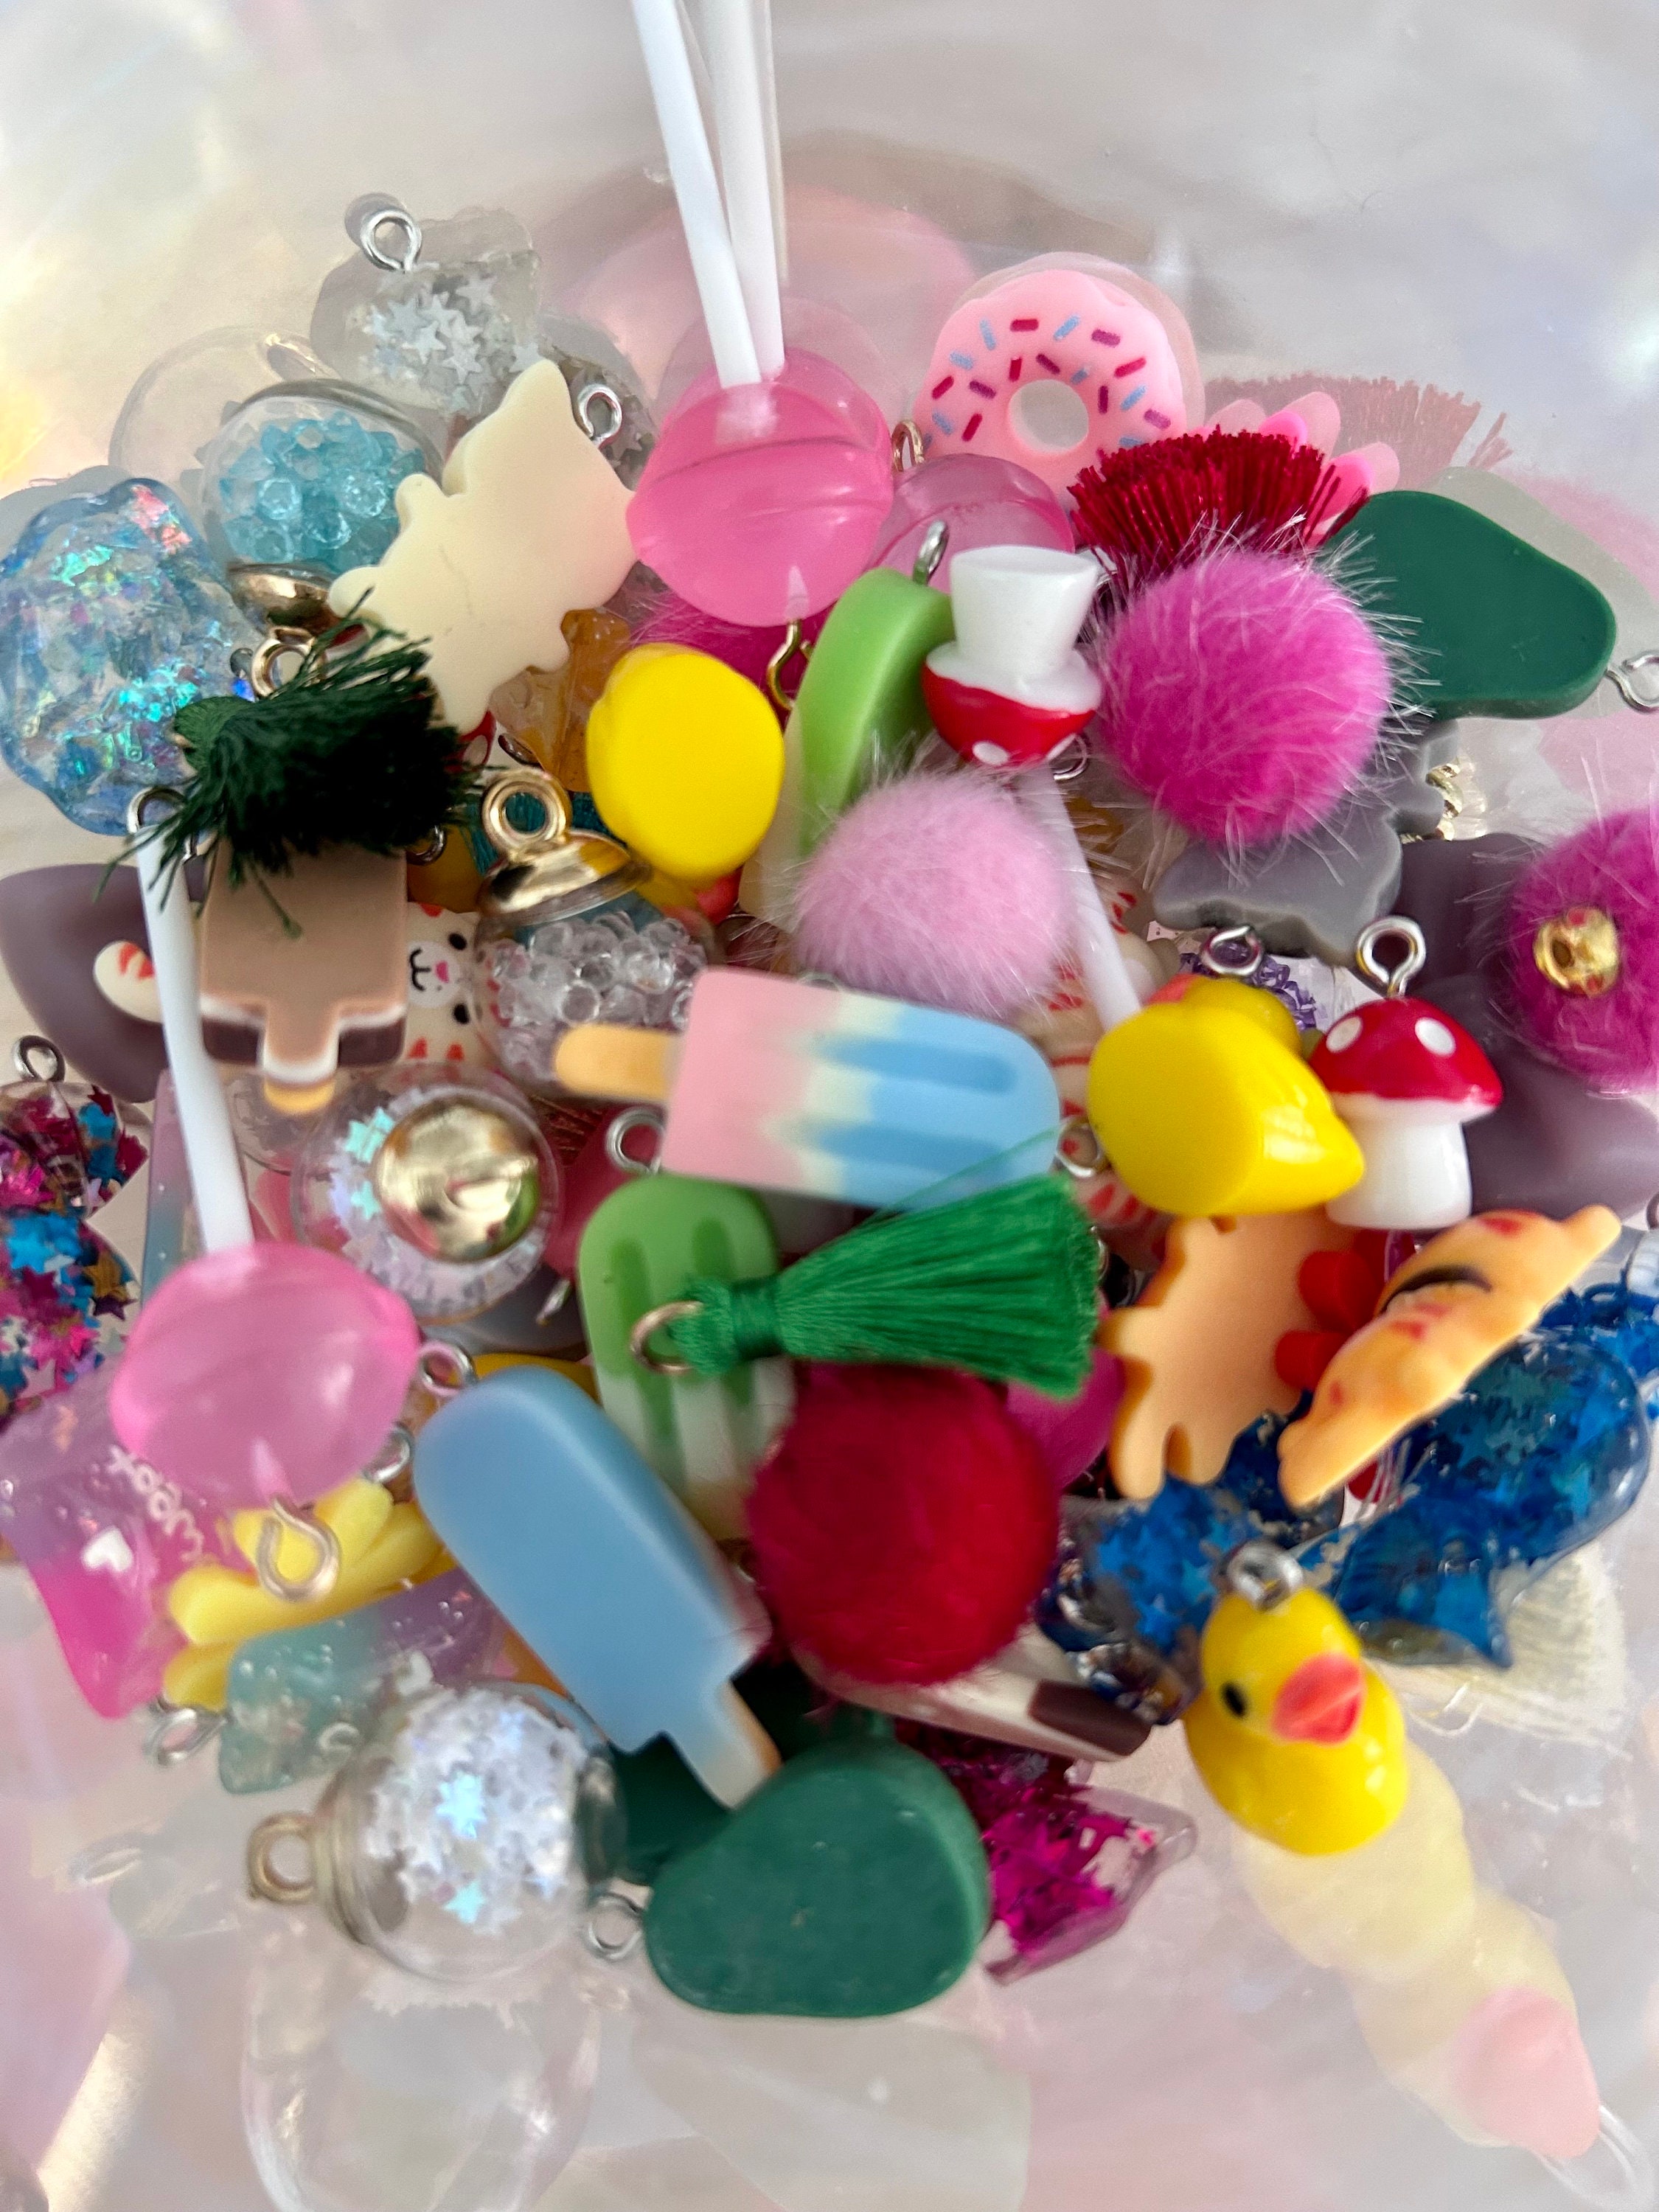 Mystery Slime Extras and Add Ins Pack Lot Bulk Slime Mystery Box Foam  Sequins Glitter Confetti, Fimo, Beads, Balls, Fishbowl, Snow, 